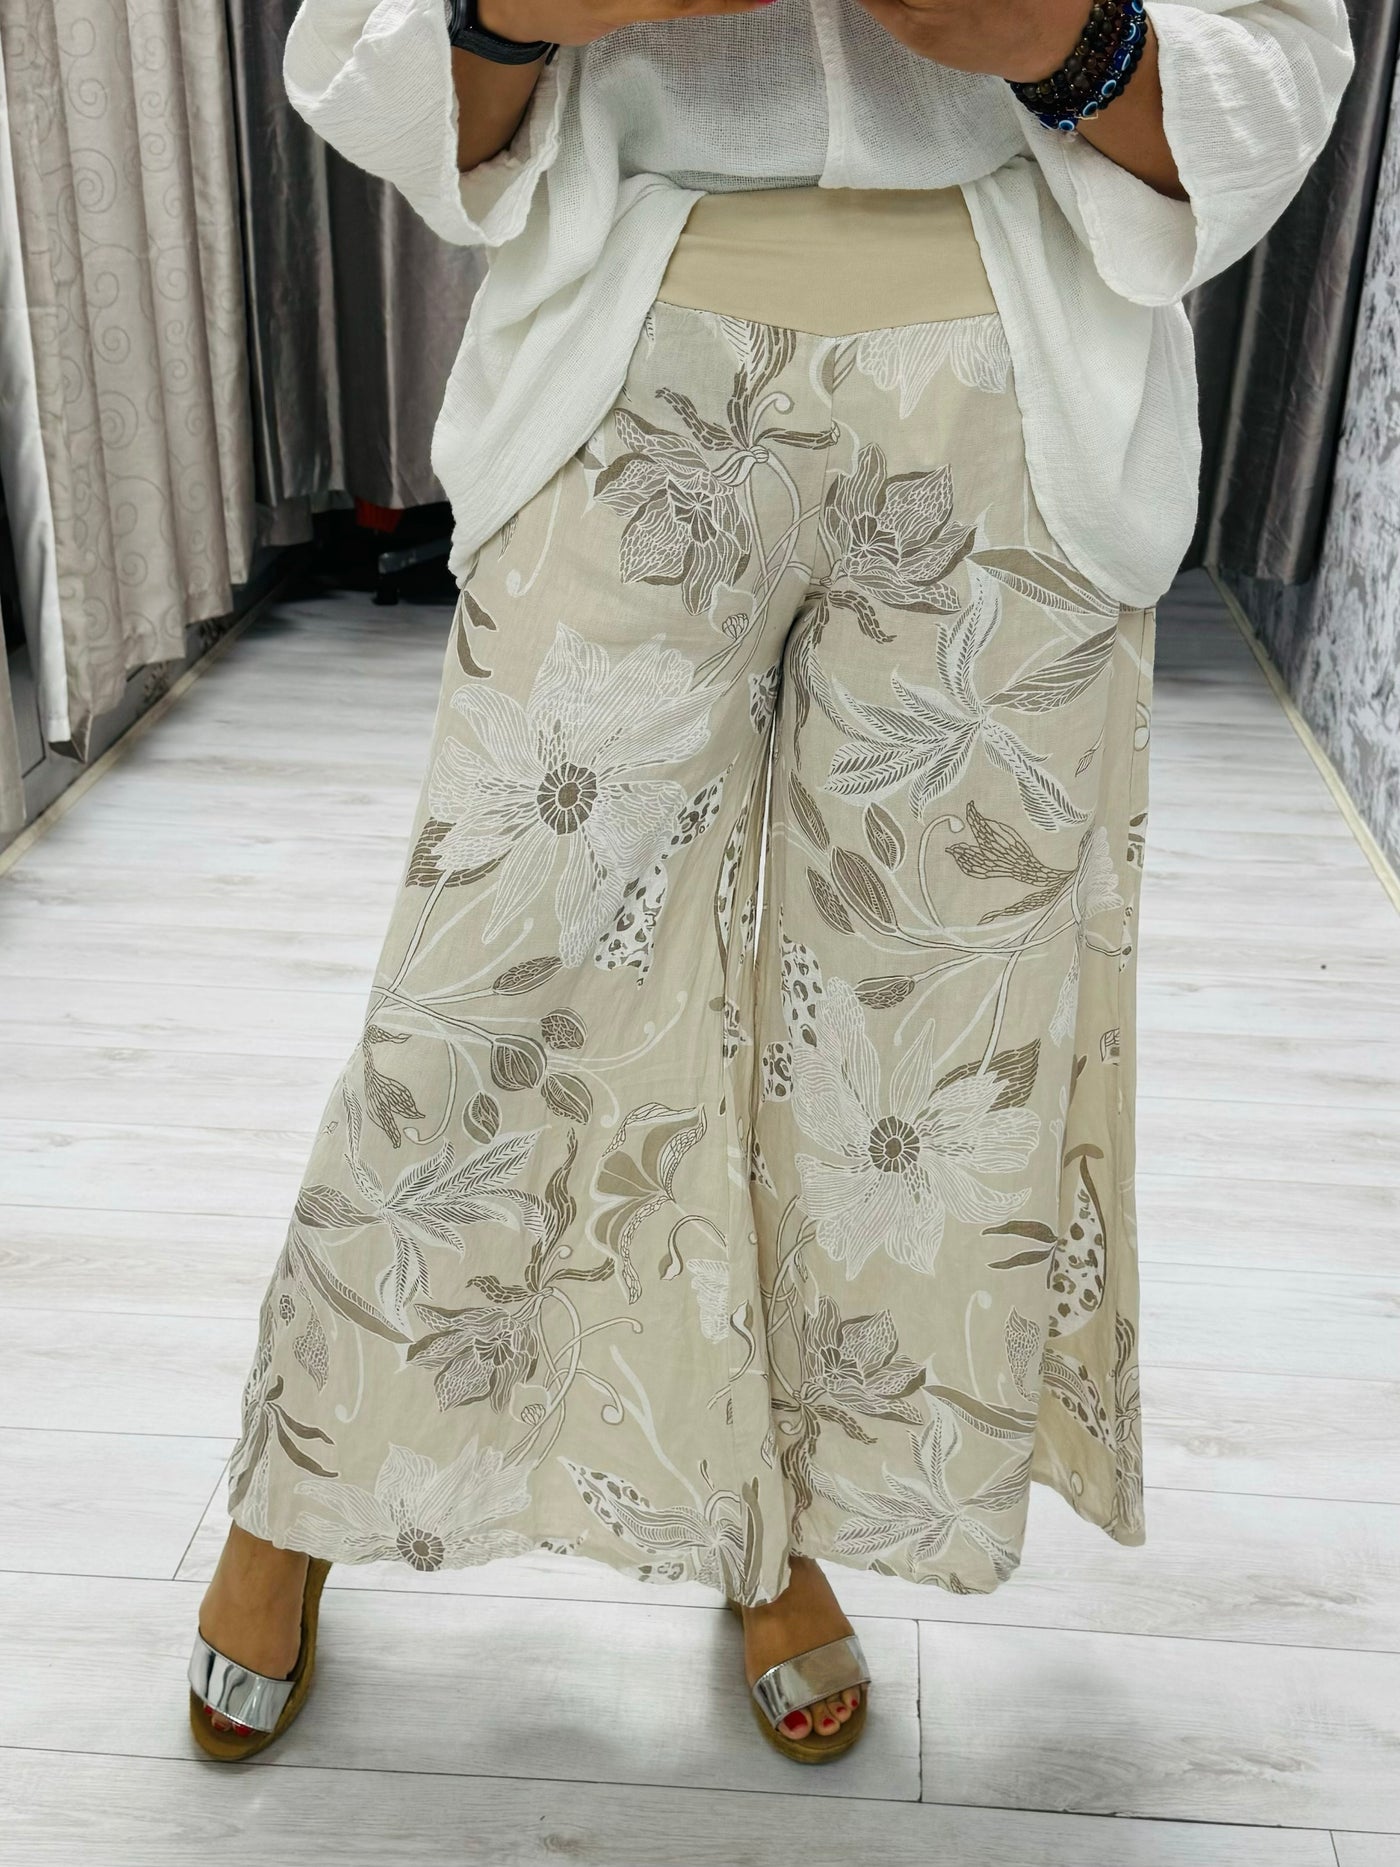 "IVY" Floral Print Trousers-Stone & White